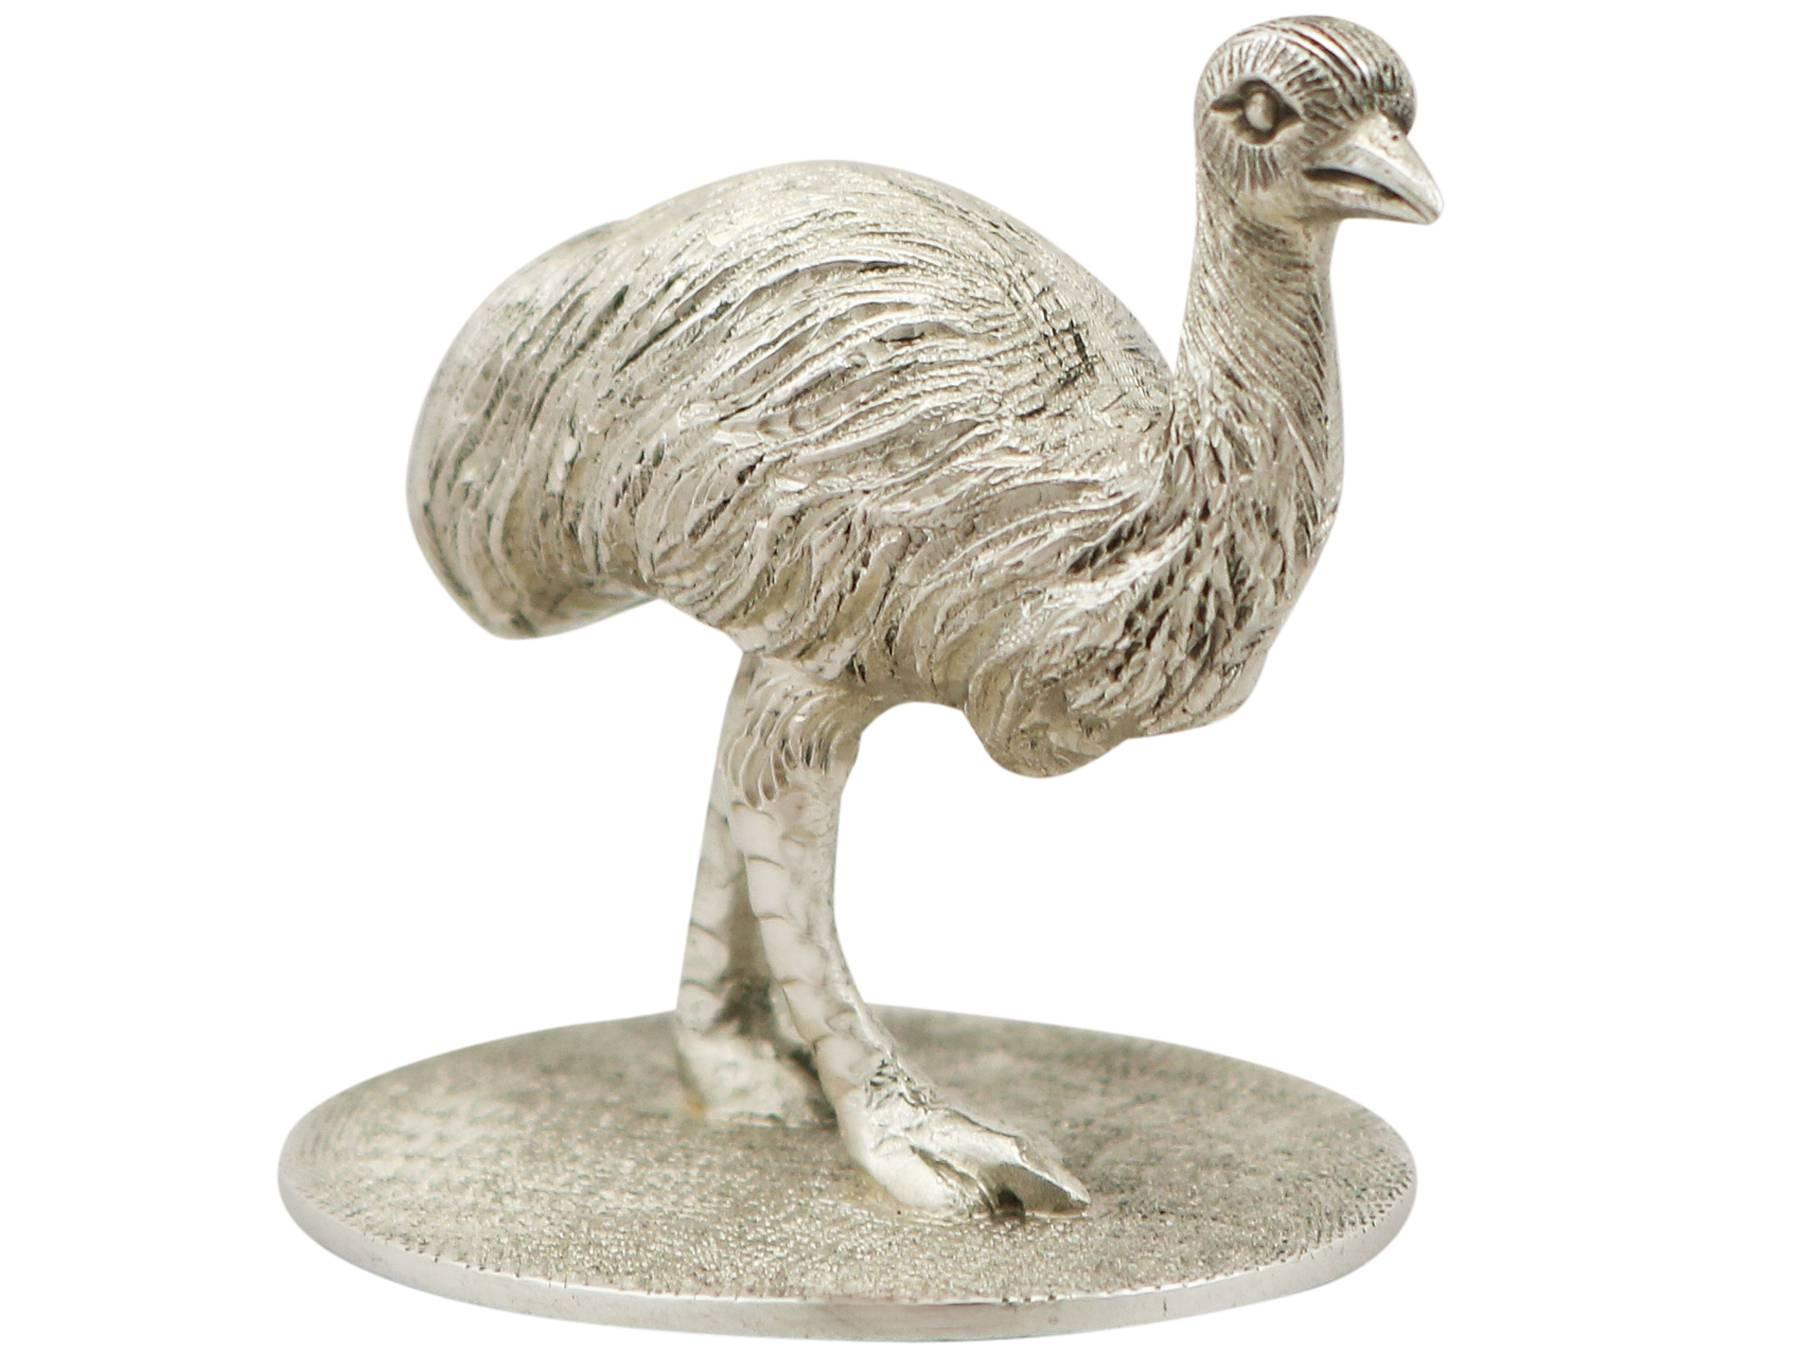 An exceptional, fine and impressive, antique Australian pure cast silver ornament realistically modeled in the form of an emu; an addition to our animal related silverware collection

This exceptional antique cast Australian silver ornament has